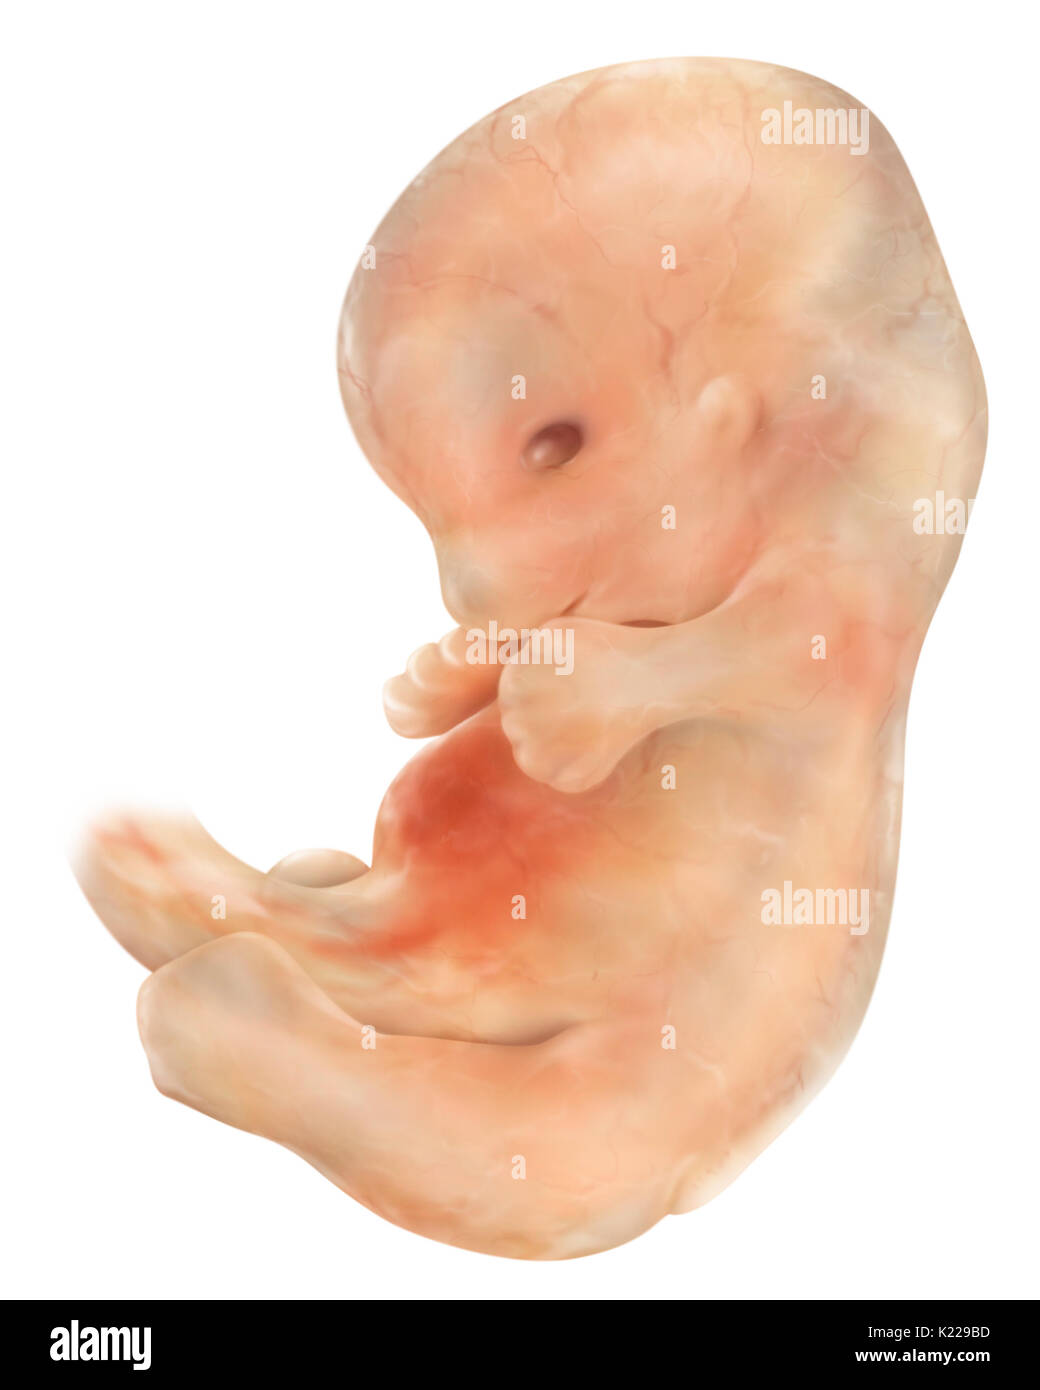 A six-week embryo measures almost 1⁄2 inch (13 mm) and weighs approximately 1.5 g. Its limbs are already differentiated and its face is beginning to have a human appearance. Stock Photo